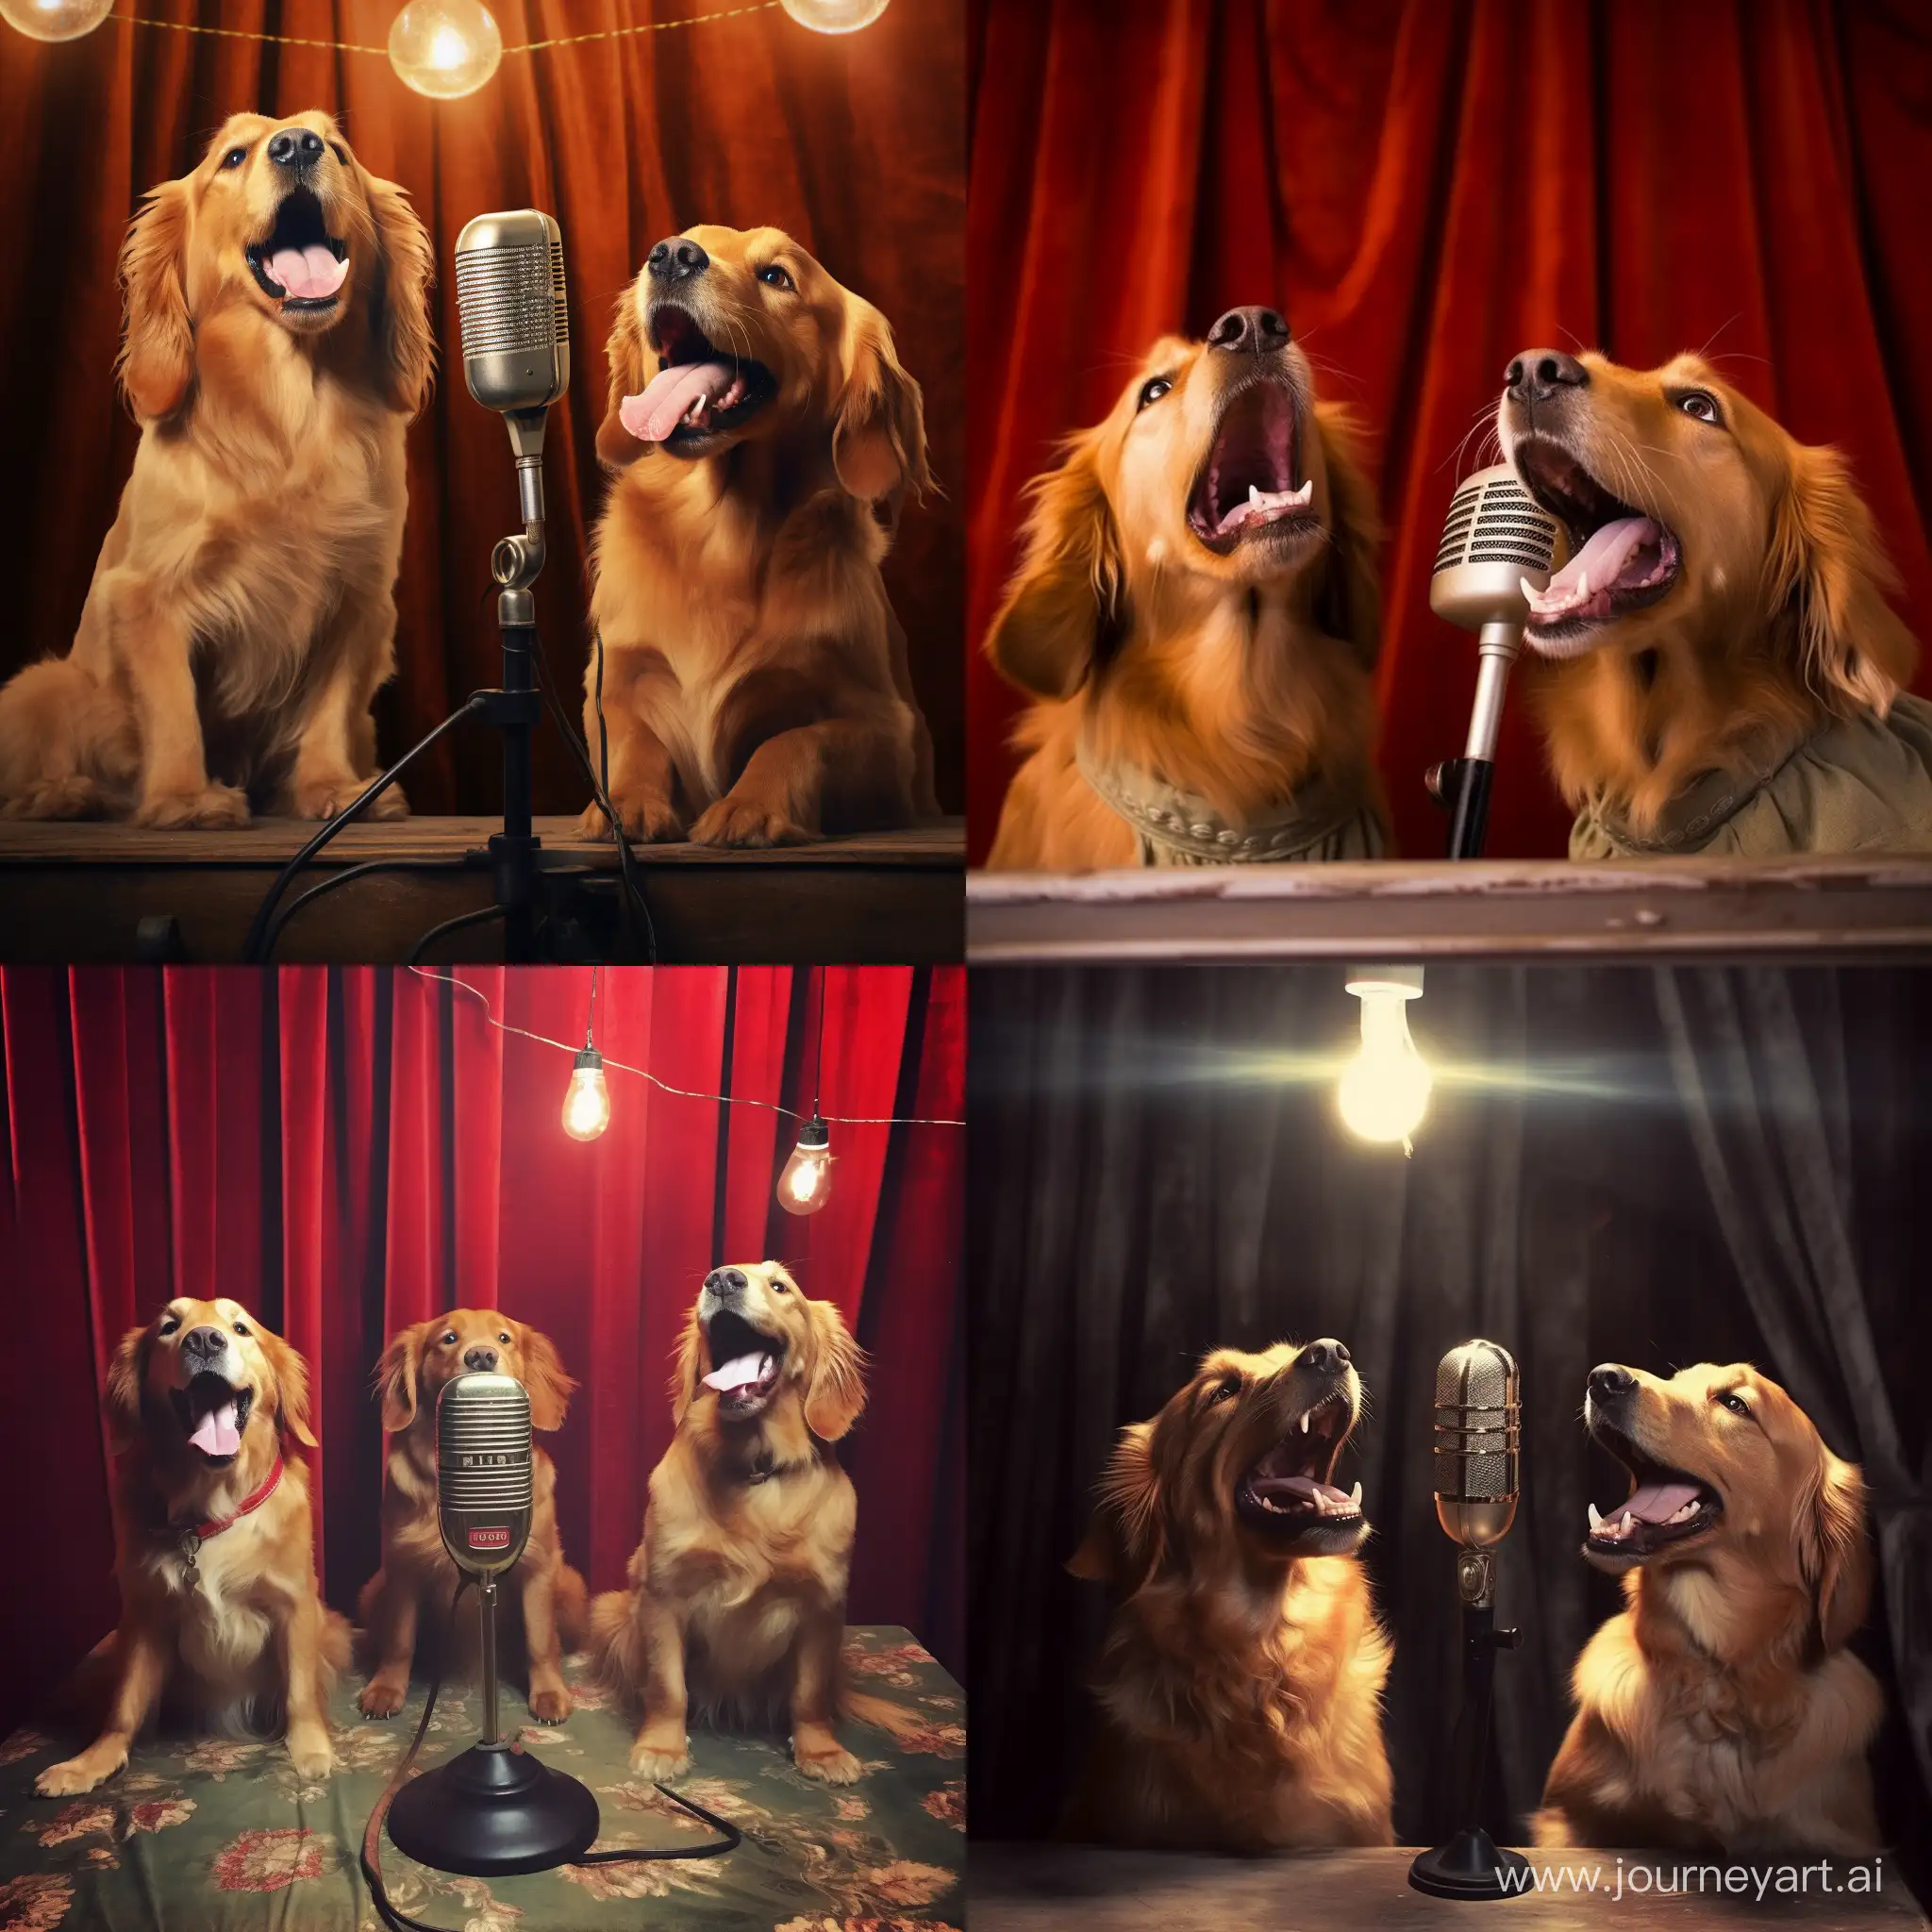 Golden-Retriever-Dogs-Singing-into-Vintage-Microphone-O-Brother-Where-Art-Thou-Tribute